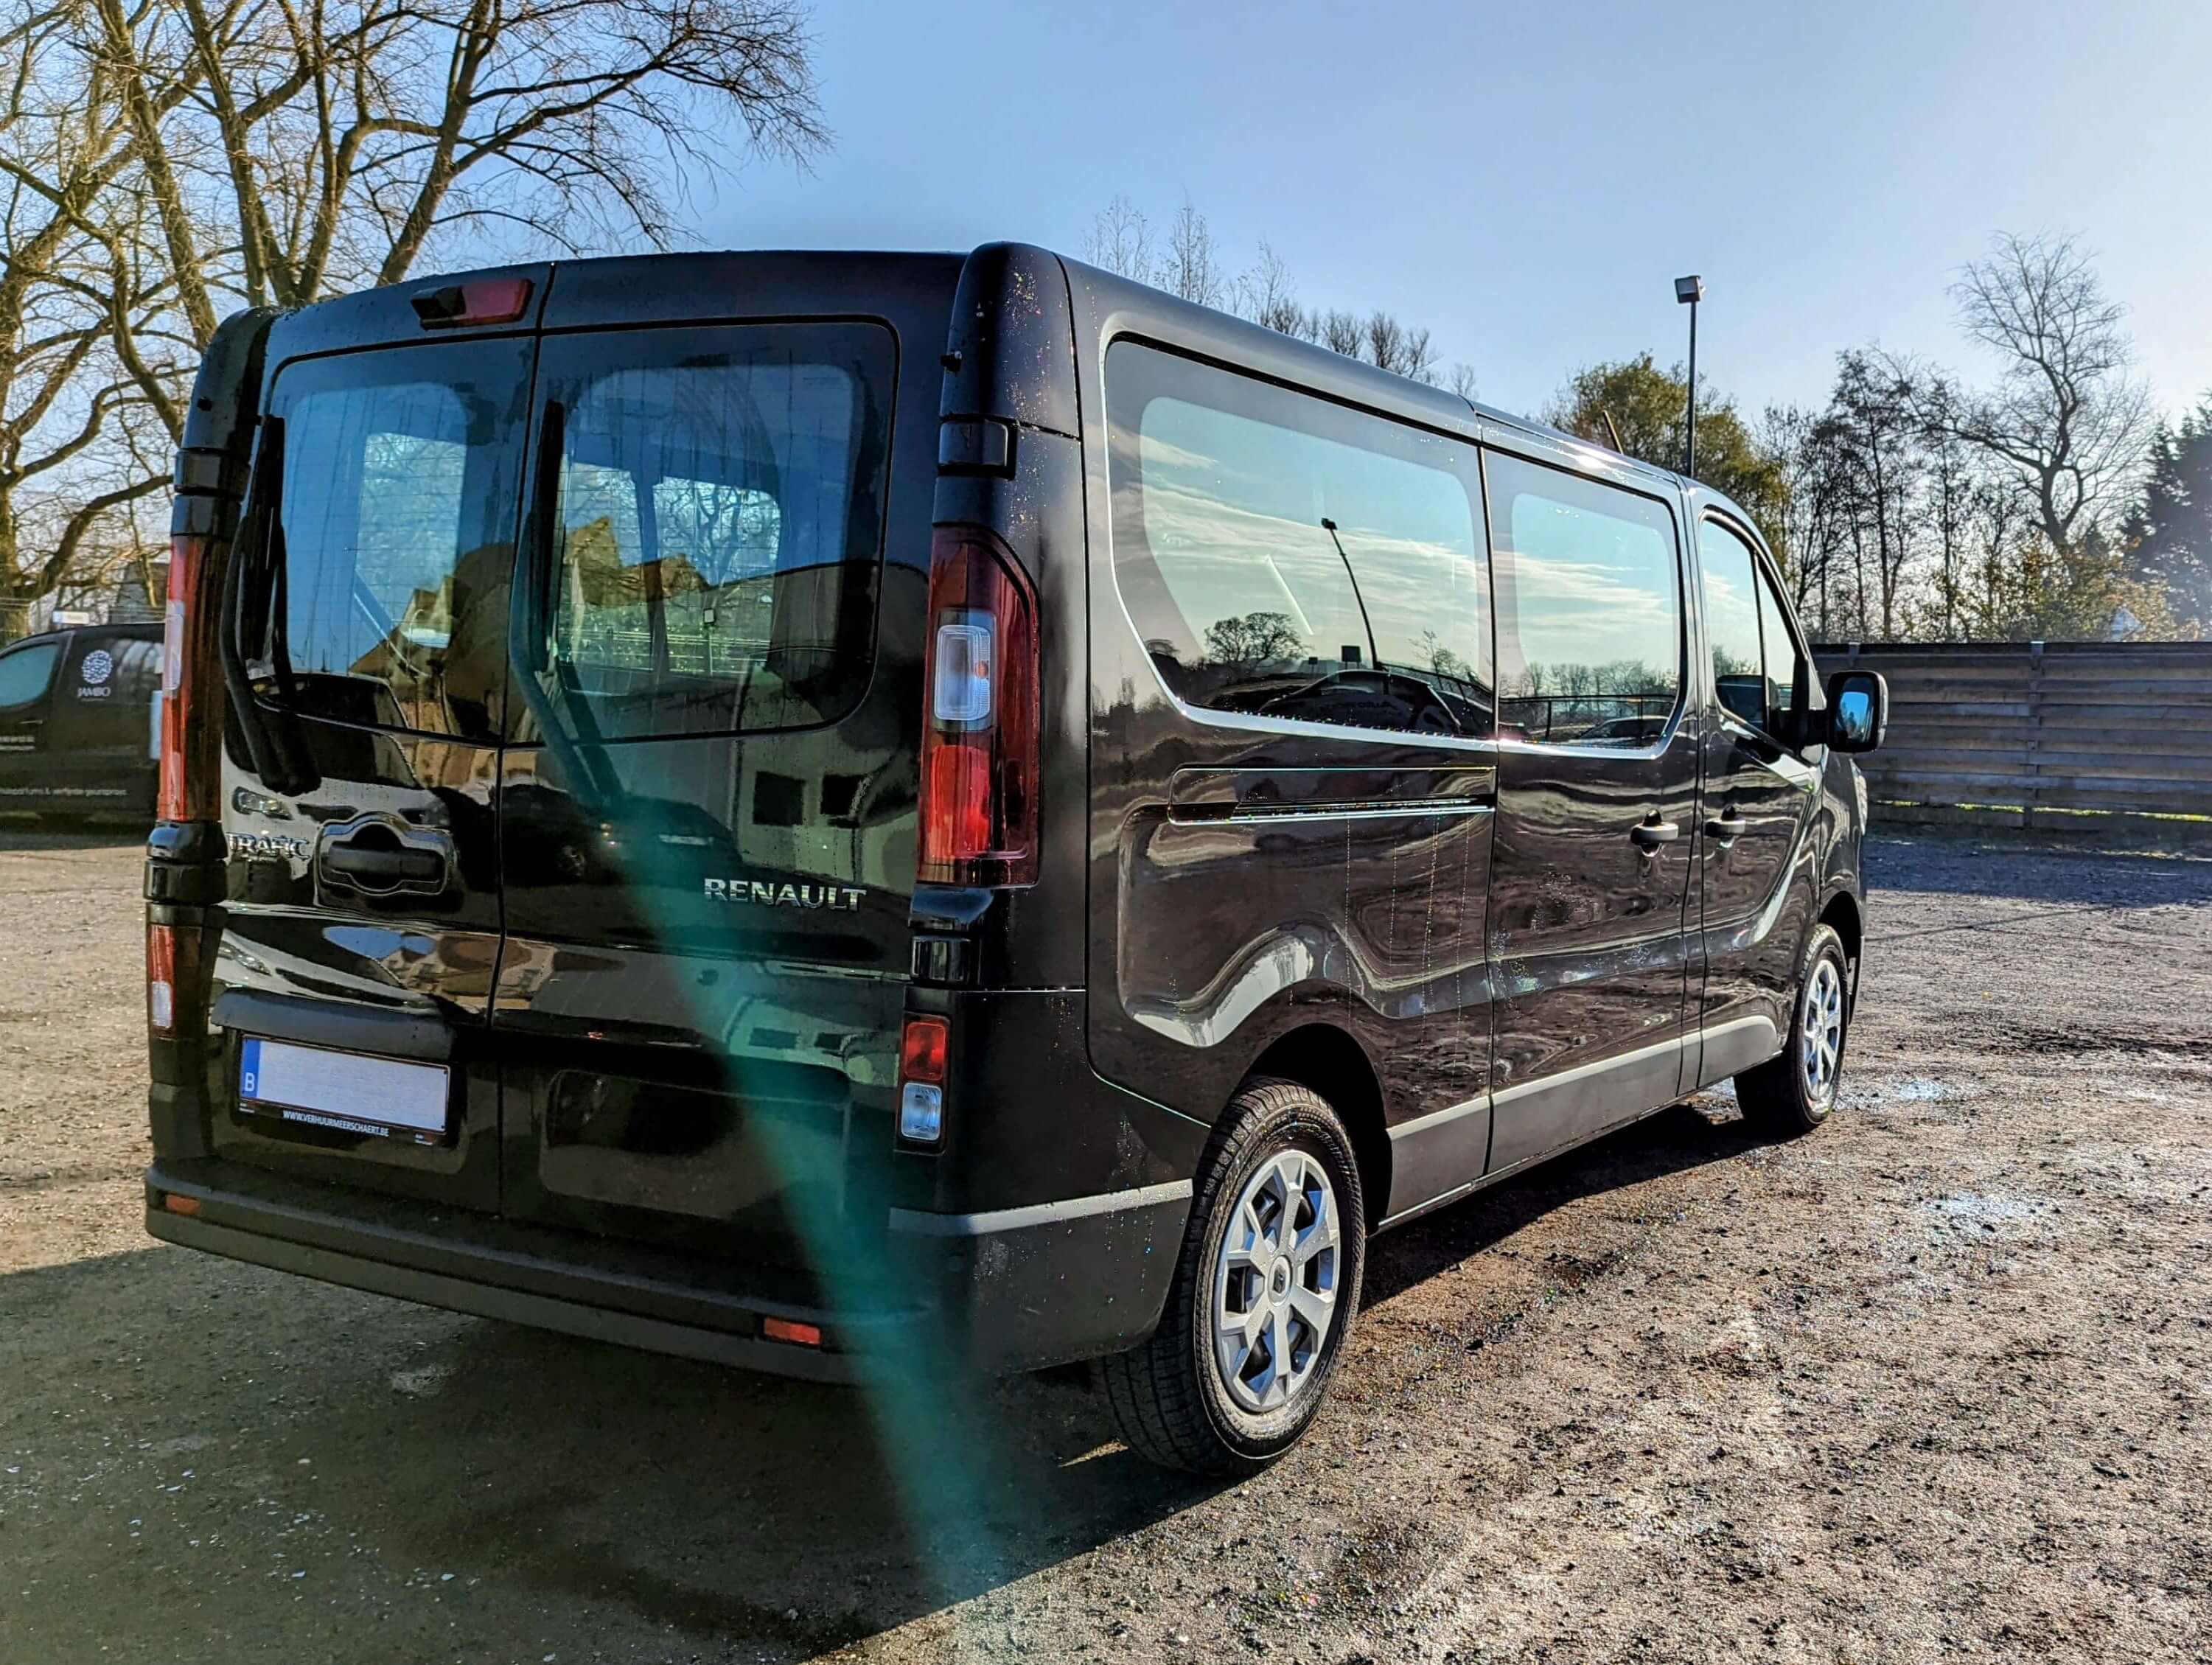 Efficient and Stylish Renault Trafic - Perfect for Group Travel.